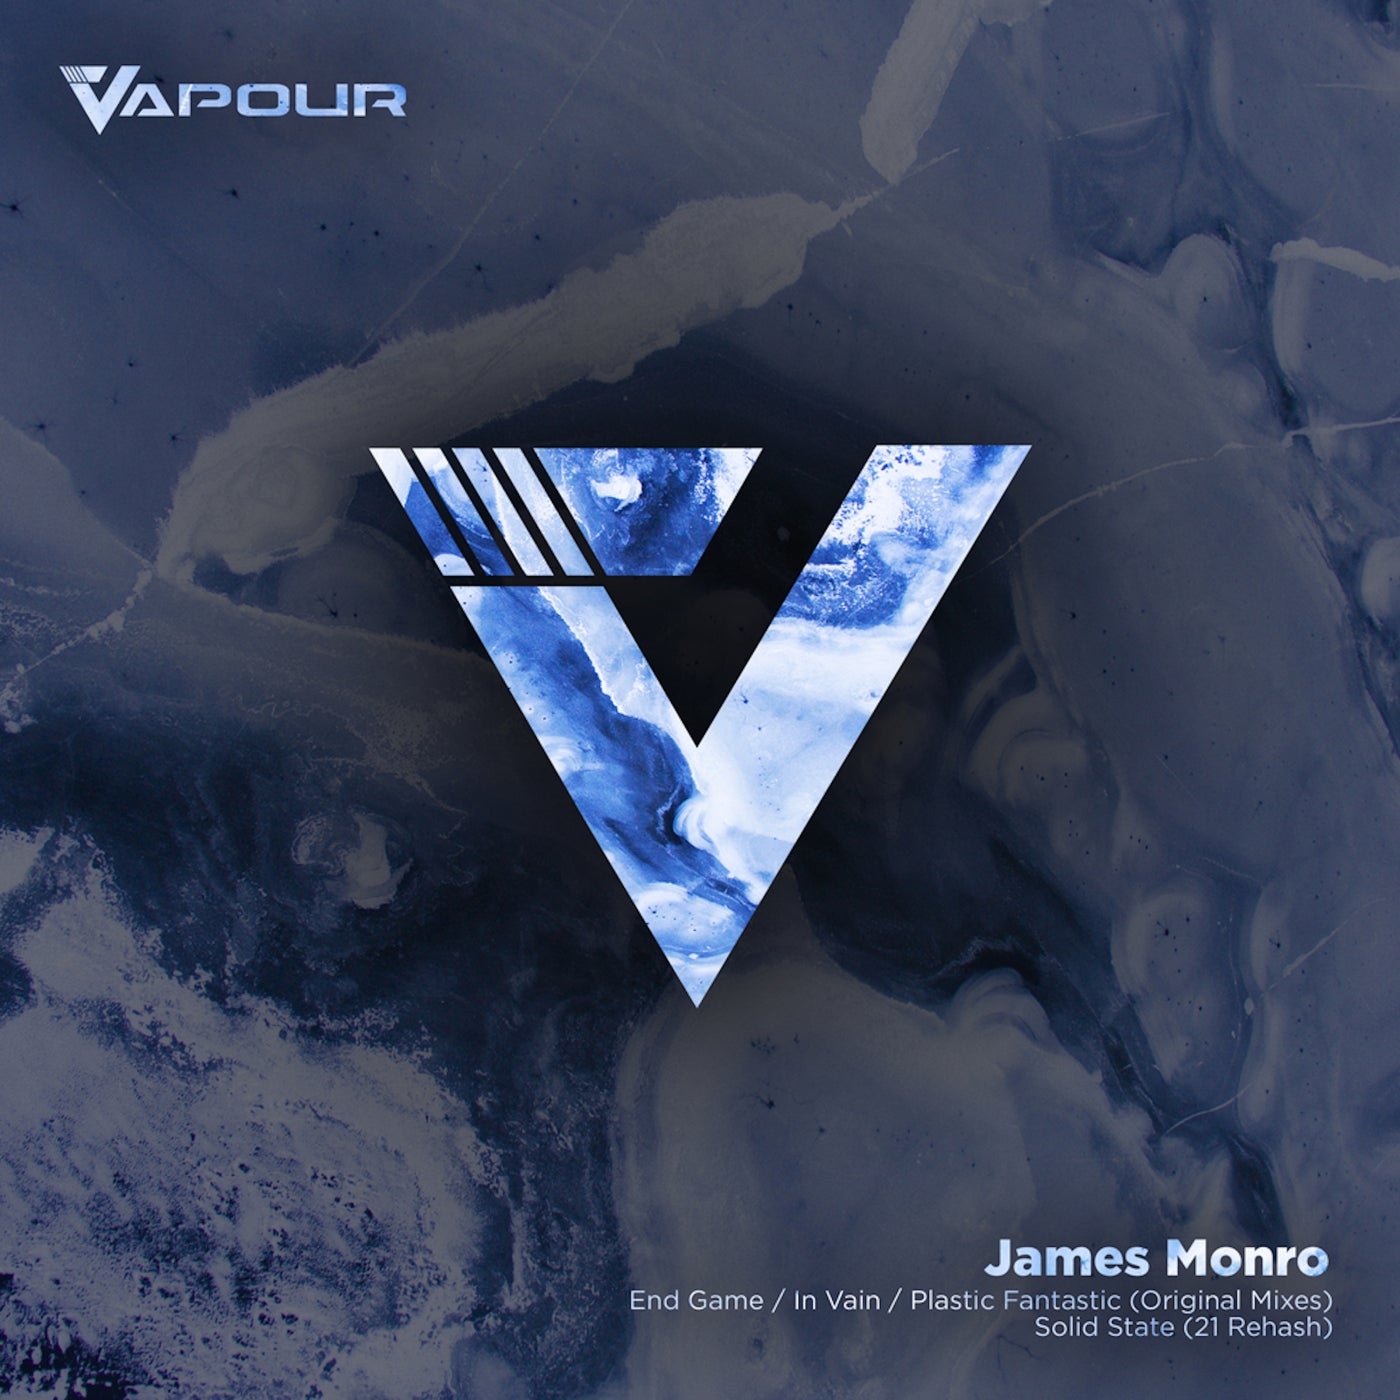 James Monro - End Game - in Vain - Plastic Fantastic - Solid State (21 Rehash) [VR144]